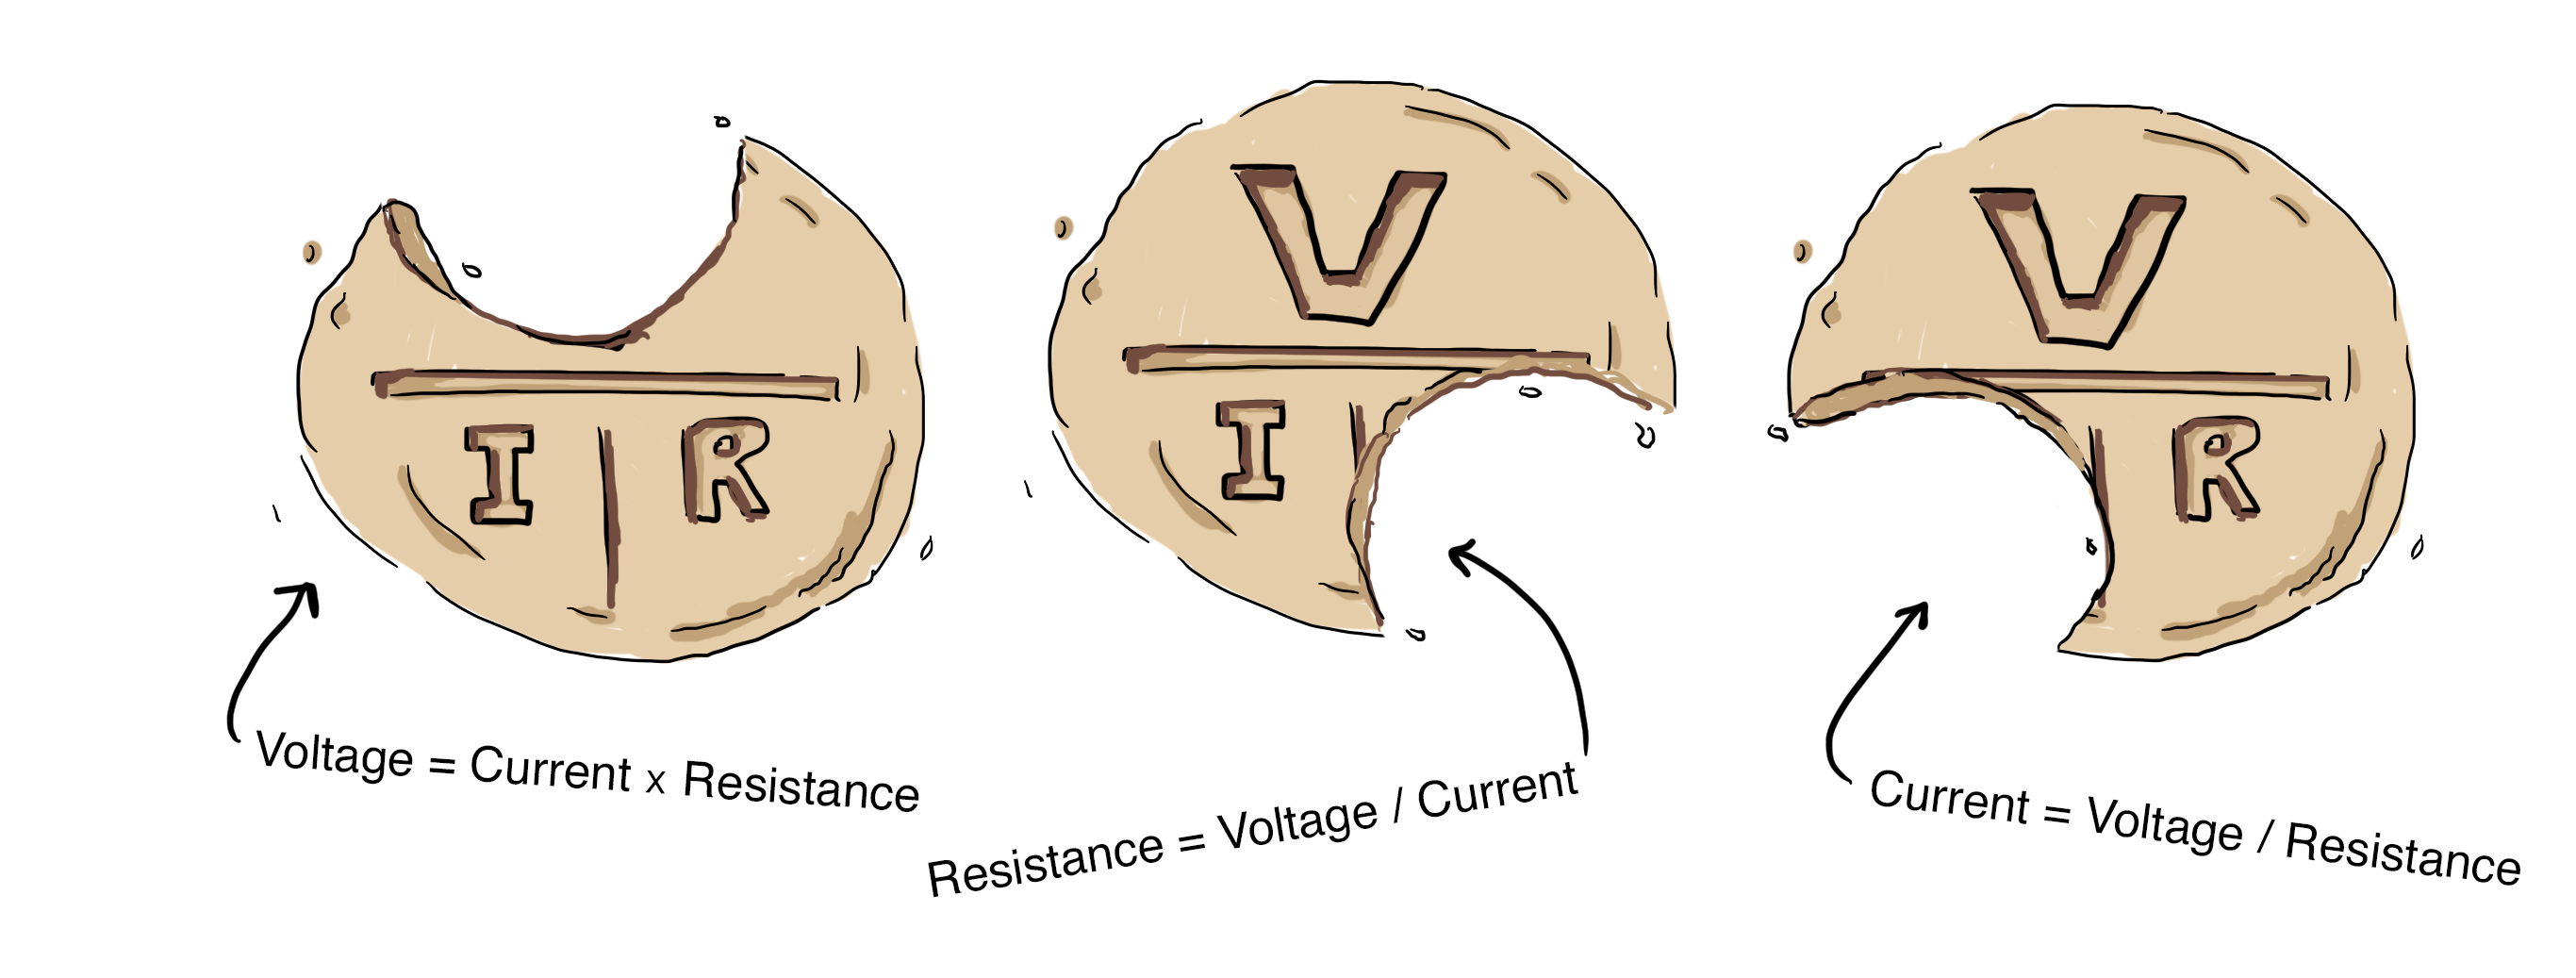 For example, if she wanted to determine resistance (R), she could bite that off and see that R = voltage (V) divided by current (I)